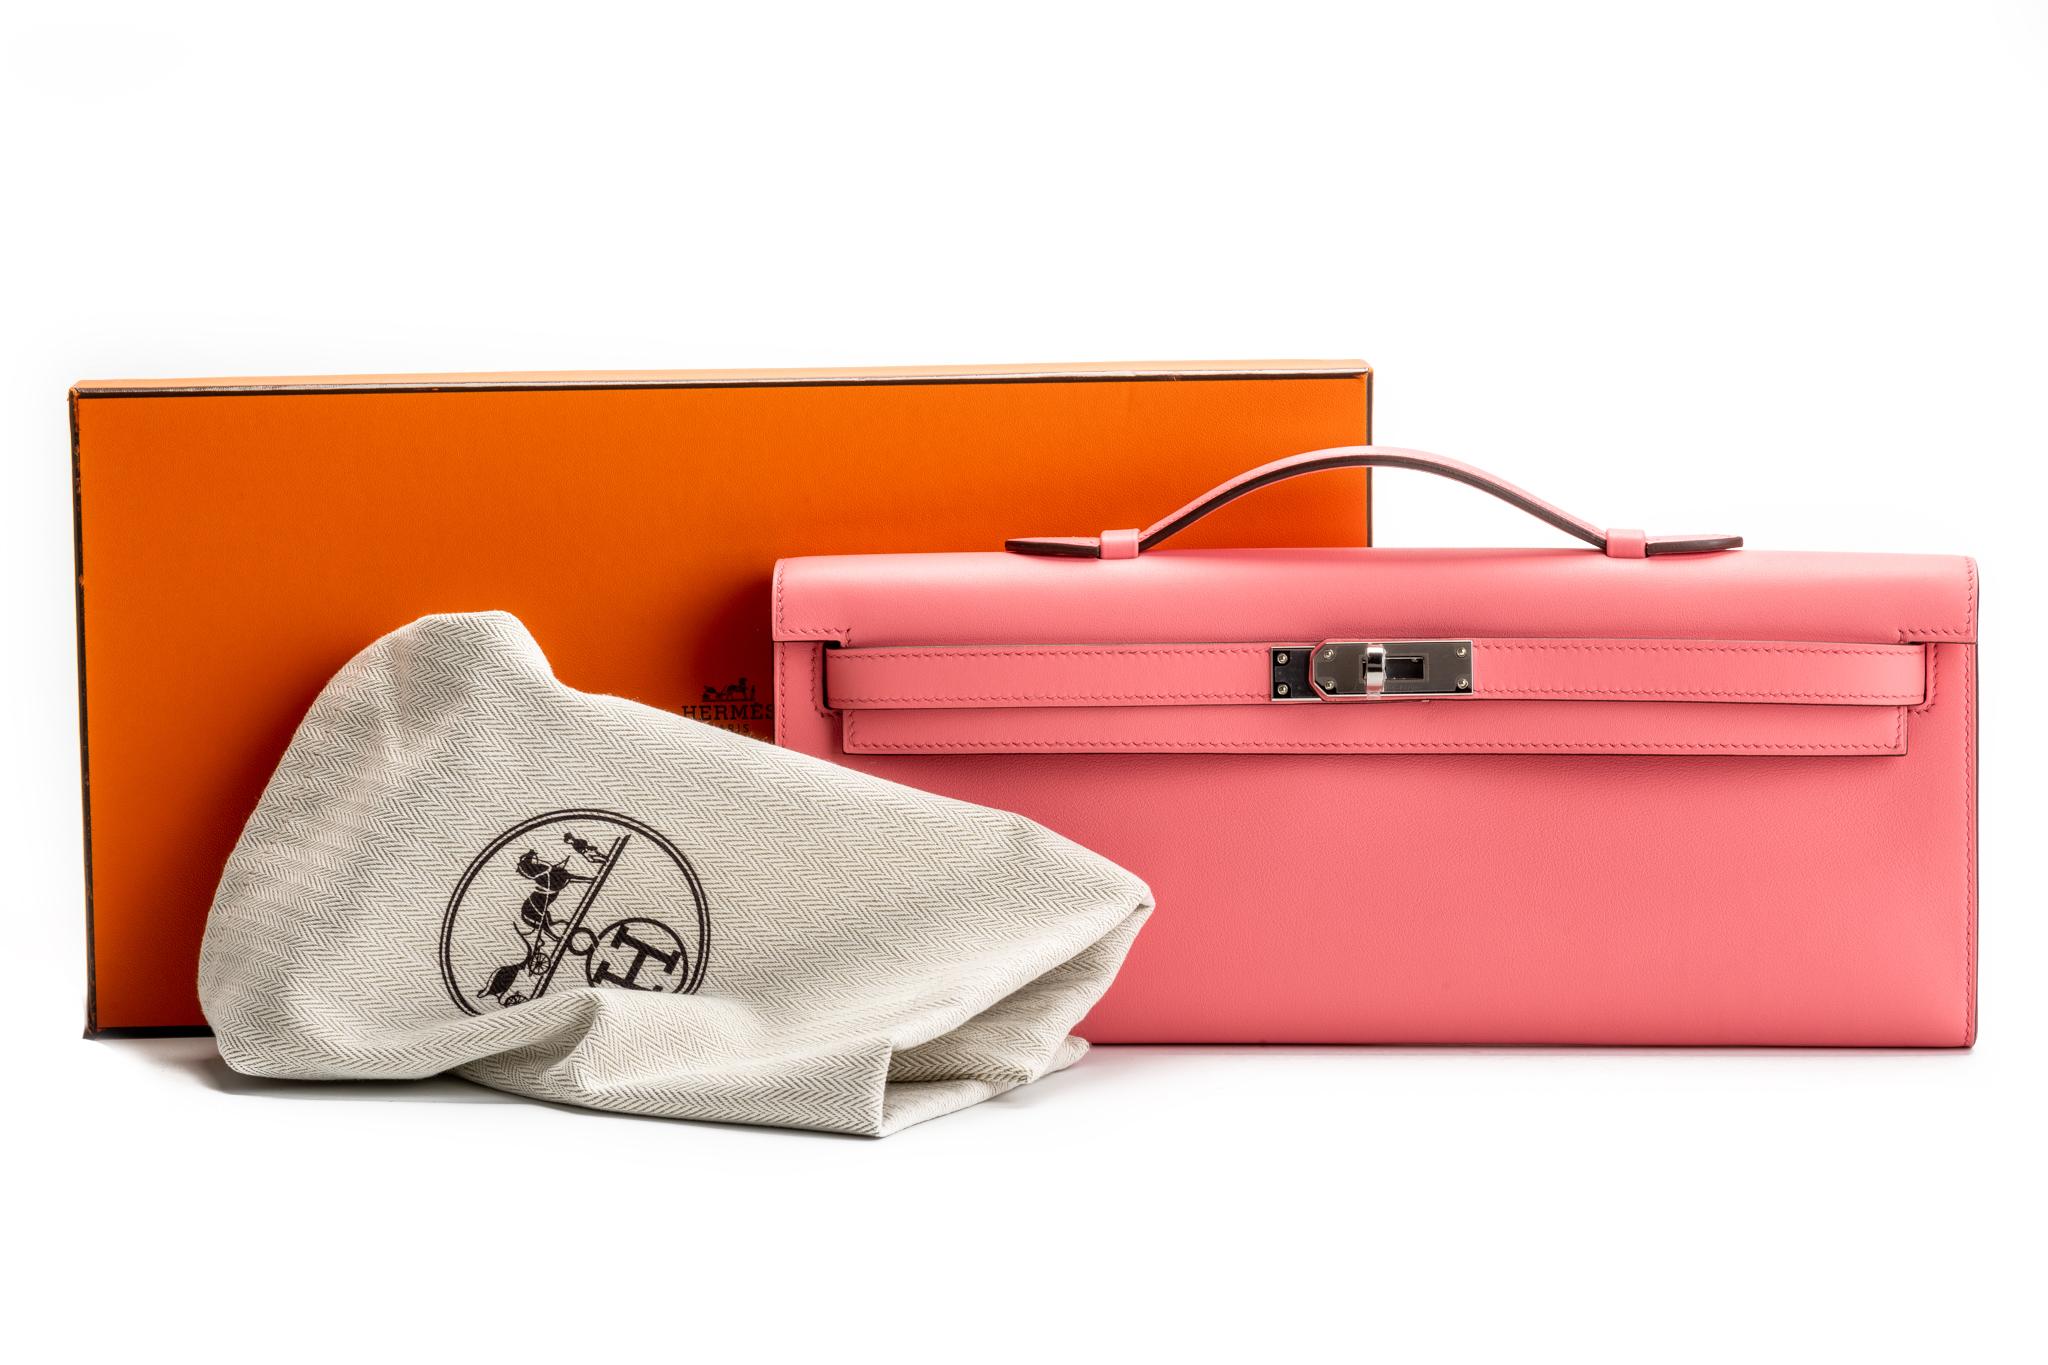 Hermes brand new in box rare and collectible kelly cut in rose azalee swift and palladium hardware. Date stamp Y for 2020. Comes with booklet, dust cover and box.